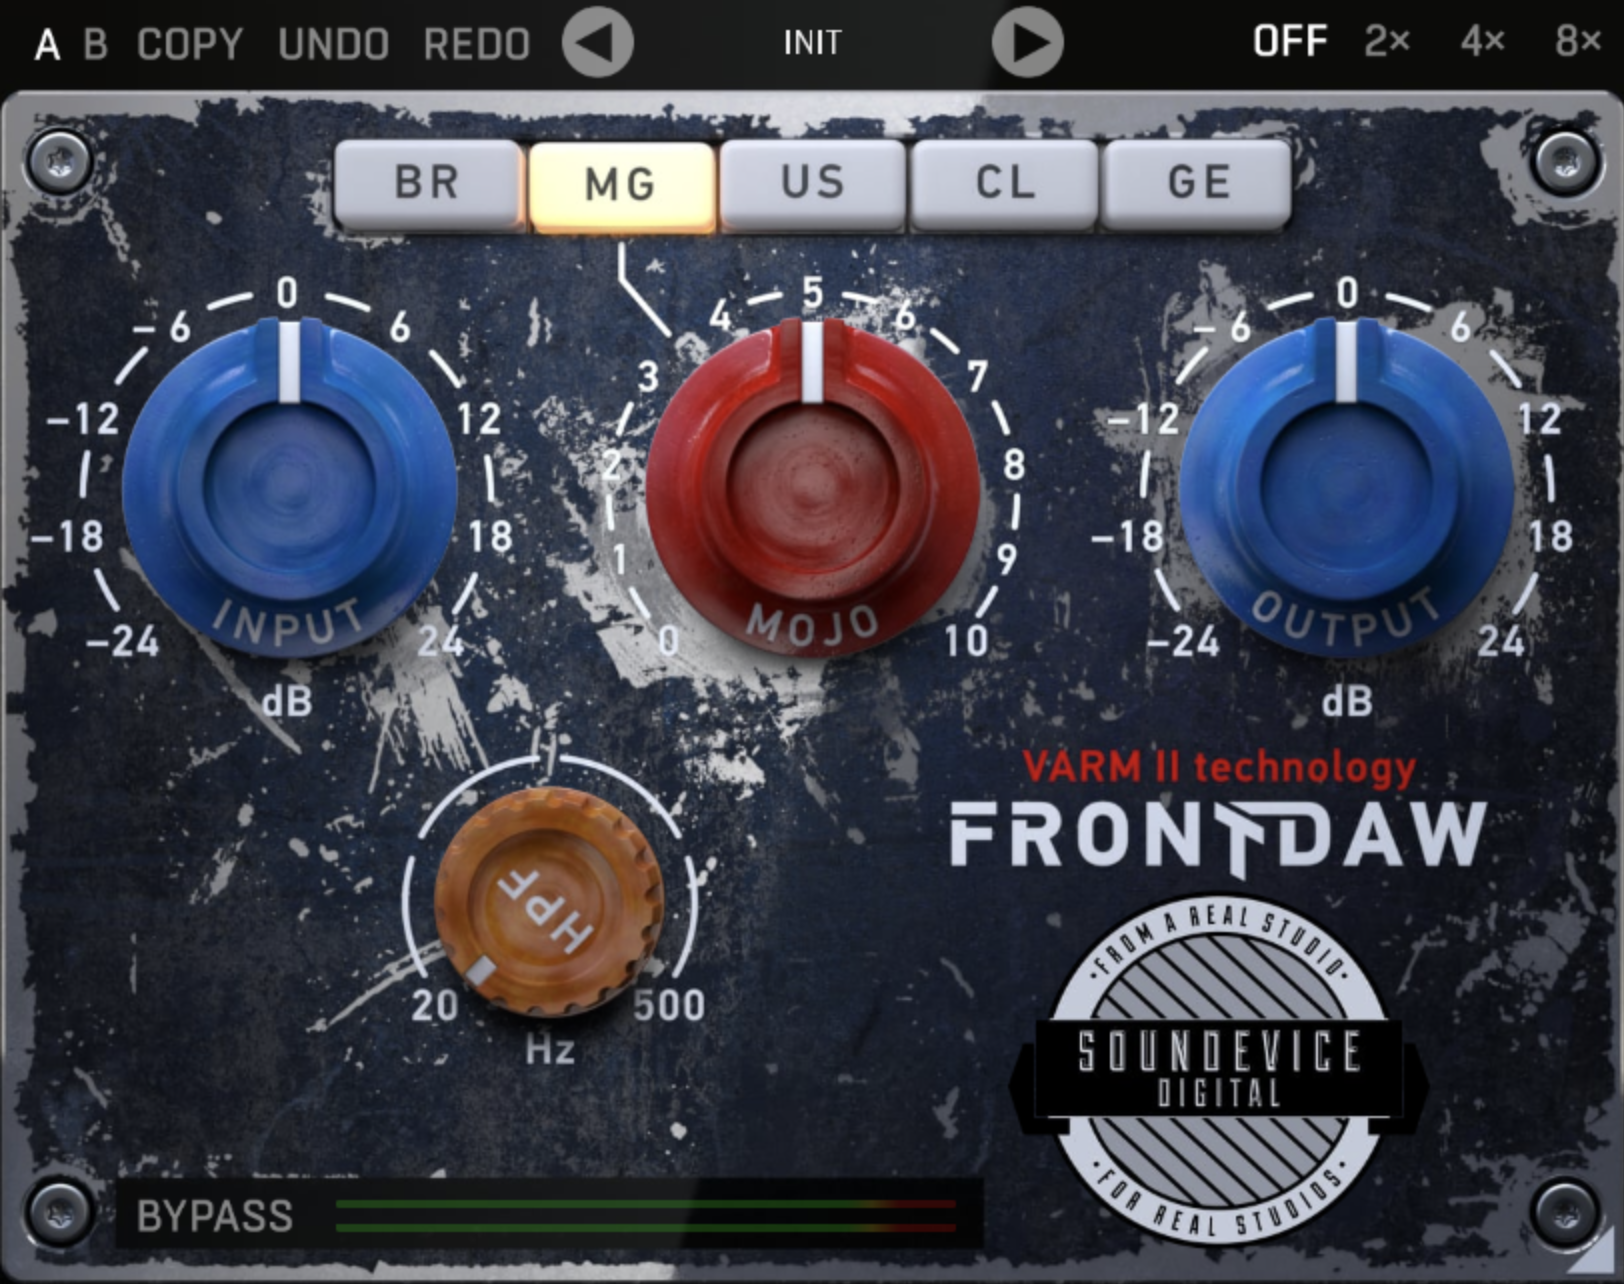 Front DAW by United Plugins